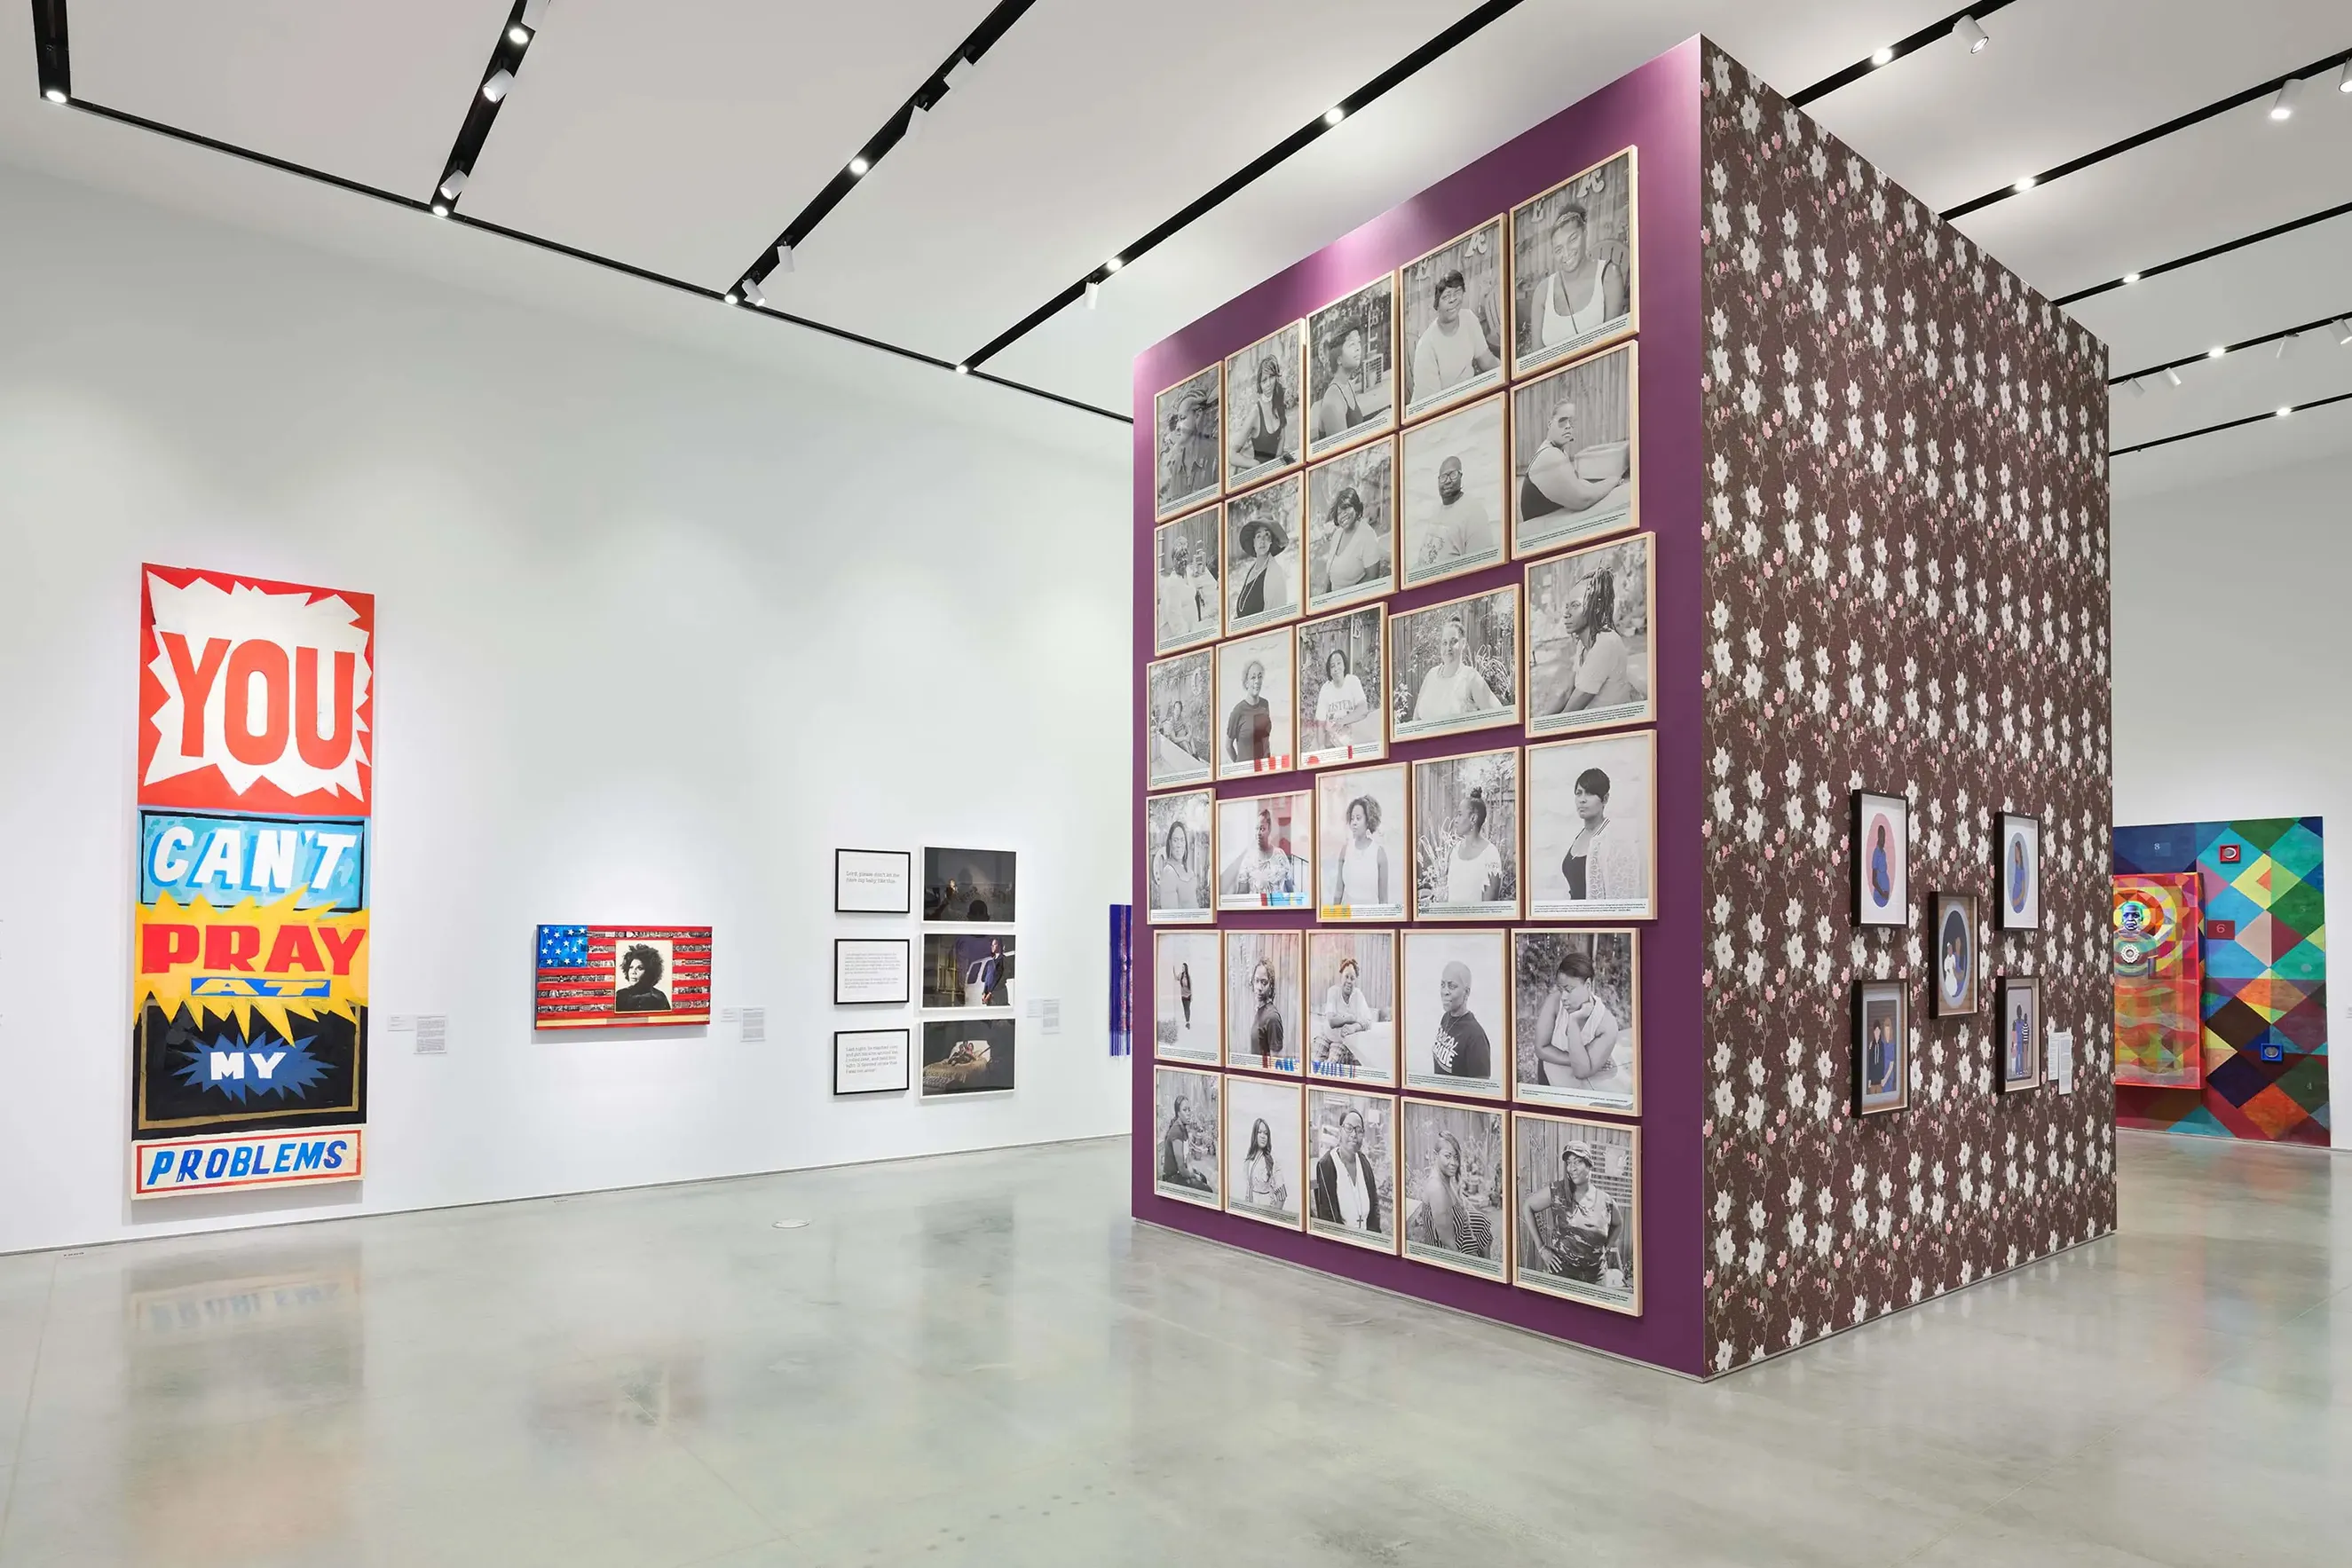 In a bright white gallery, a purple ceiling height structure is hung with a grid of black and white portraits. Around the gallery are colorful paintings and photographs.